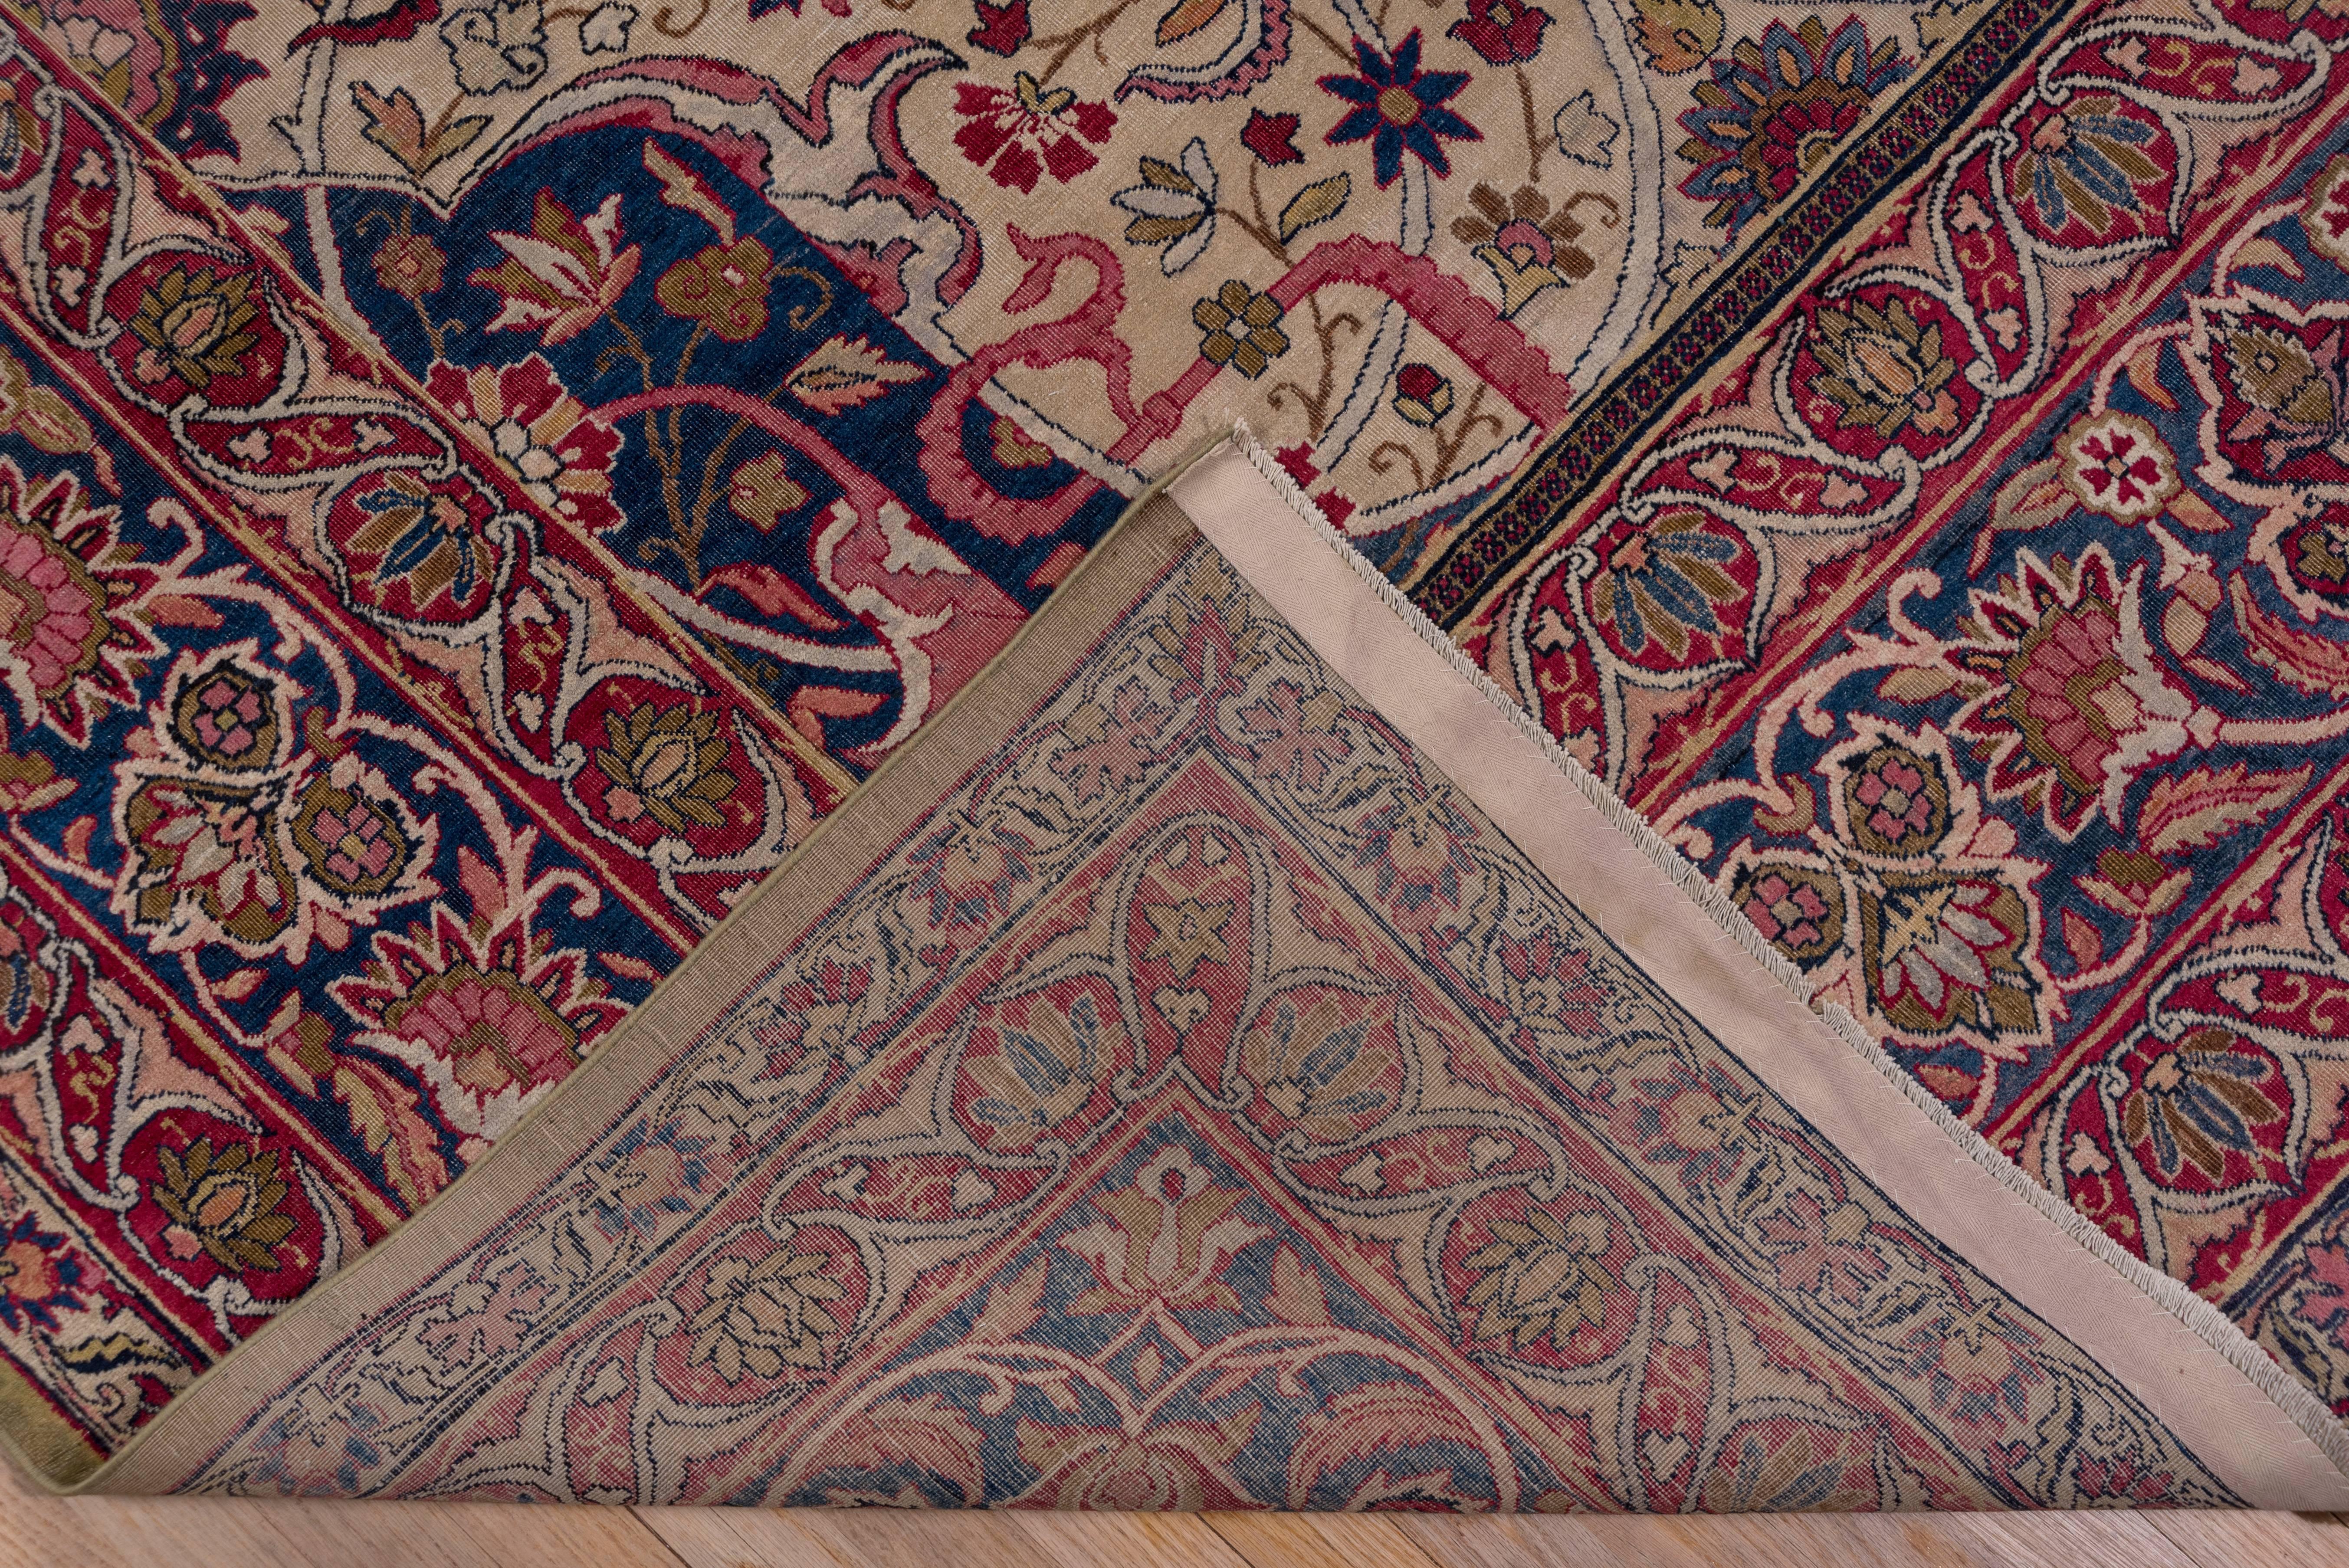 Classical Persian carpet design often followed the art of book binding and illuminated manuscript. Many of the best manuscript painters in the 16th and 17th centuries translated their works on paper into immaculate carpet designs for the most